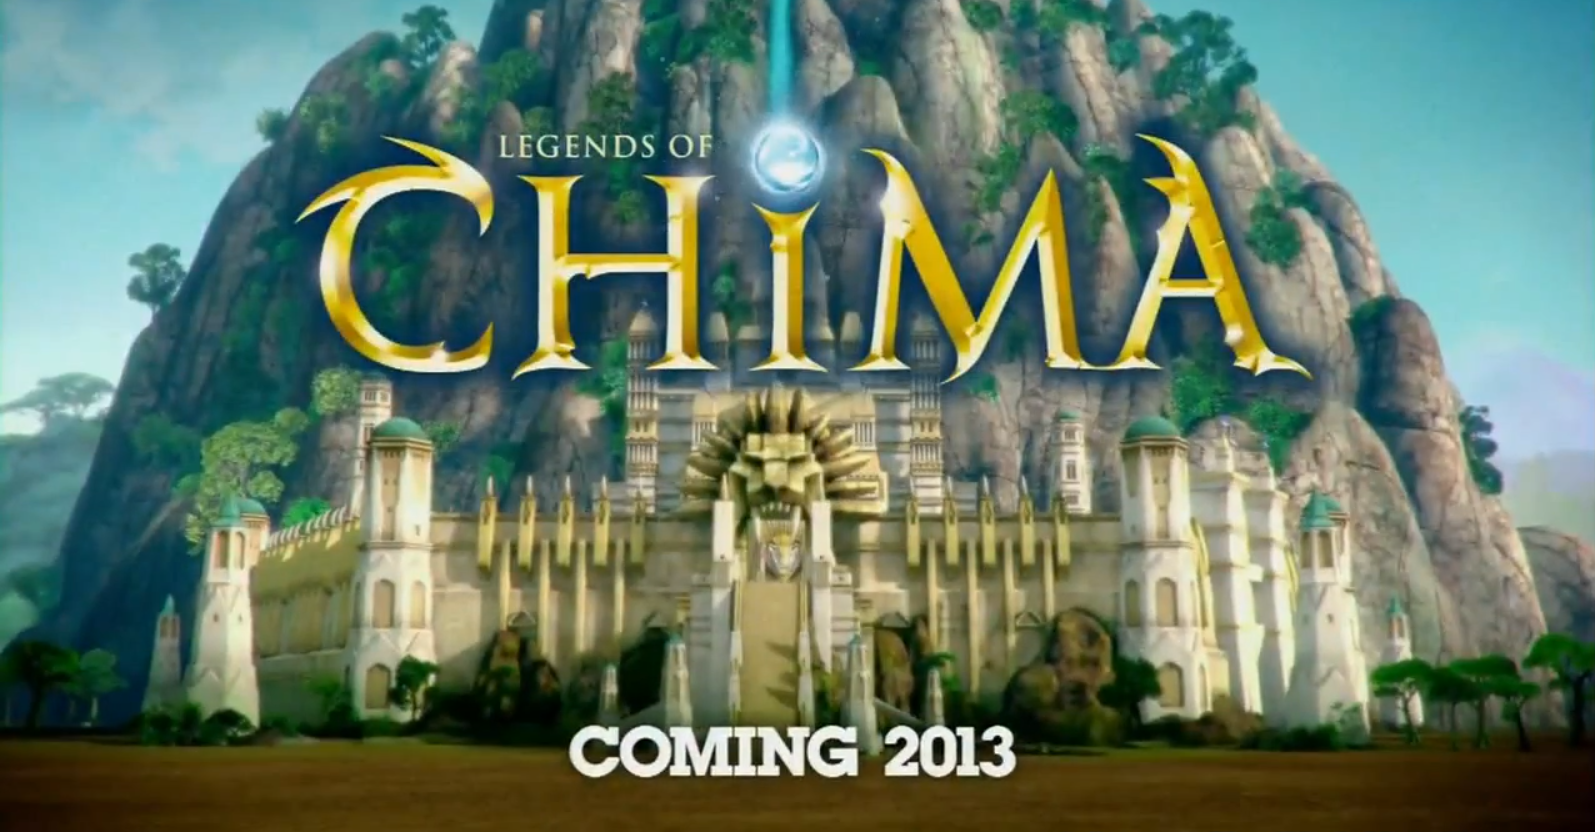 Legends of Chima: The Animated Series - Brickipedia, the LEGO Wiki1595 x 832